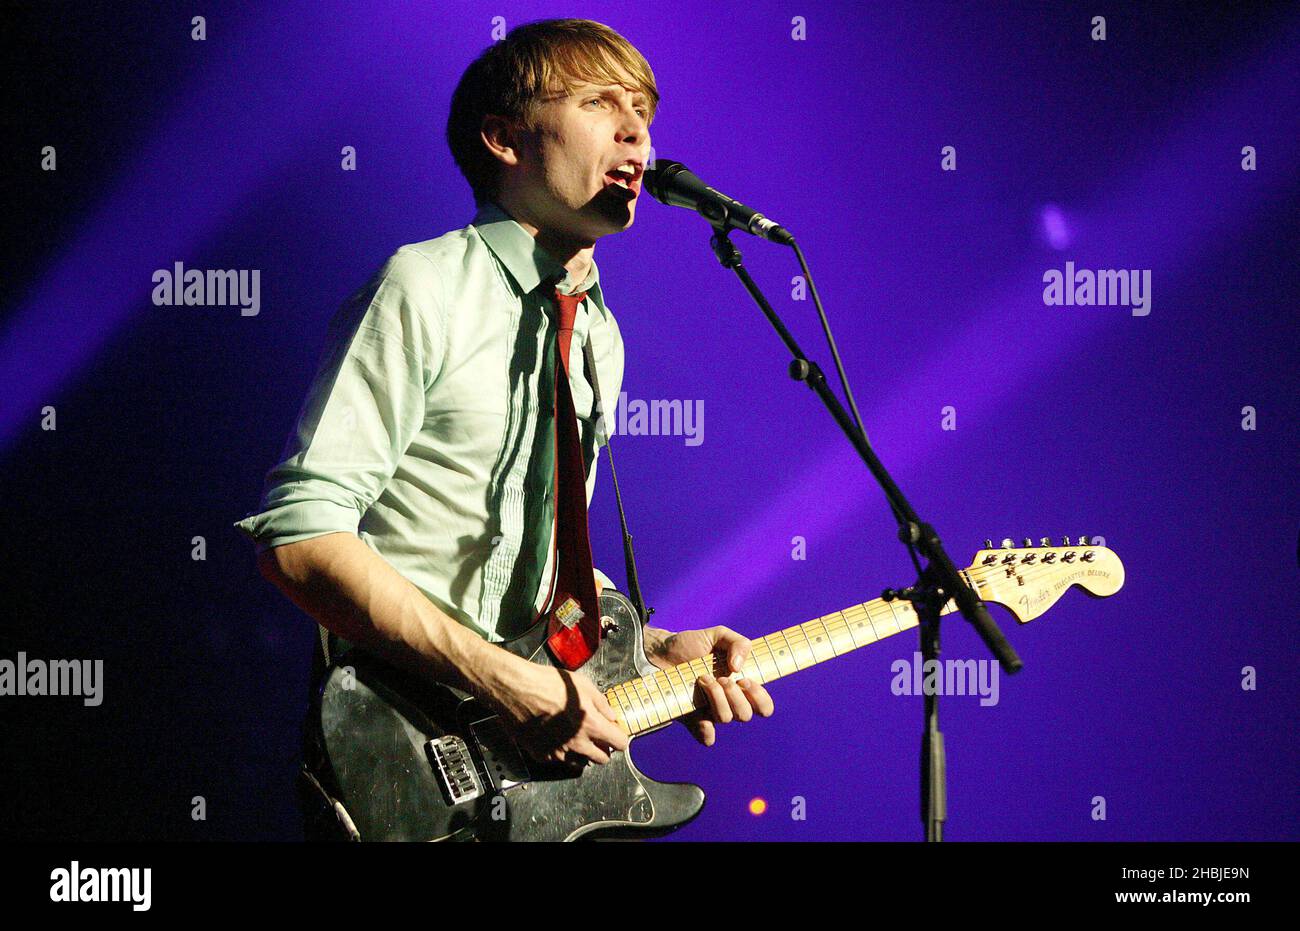 Robert Hardy;Alexander Kapranos;Nicholas McCarthy;Paul Thomson of band Franz Ferdinand performs on stage during final three London dates of their UK tour at Carling Academy Brixton on October 28, 2004 in London. Stock Photo